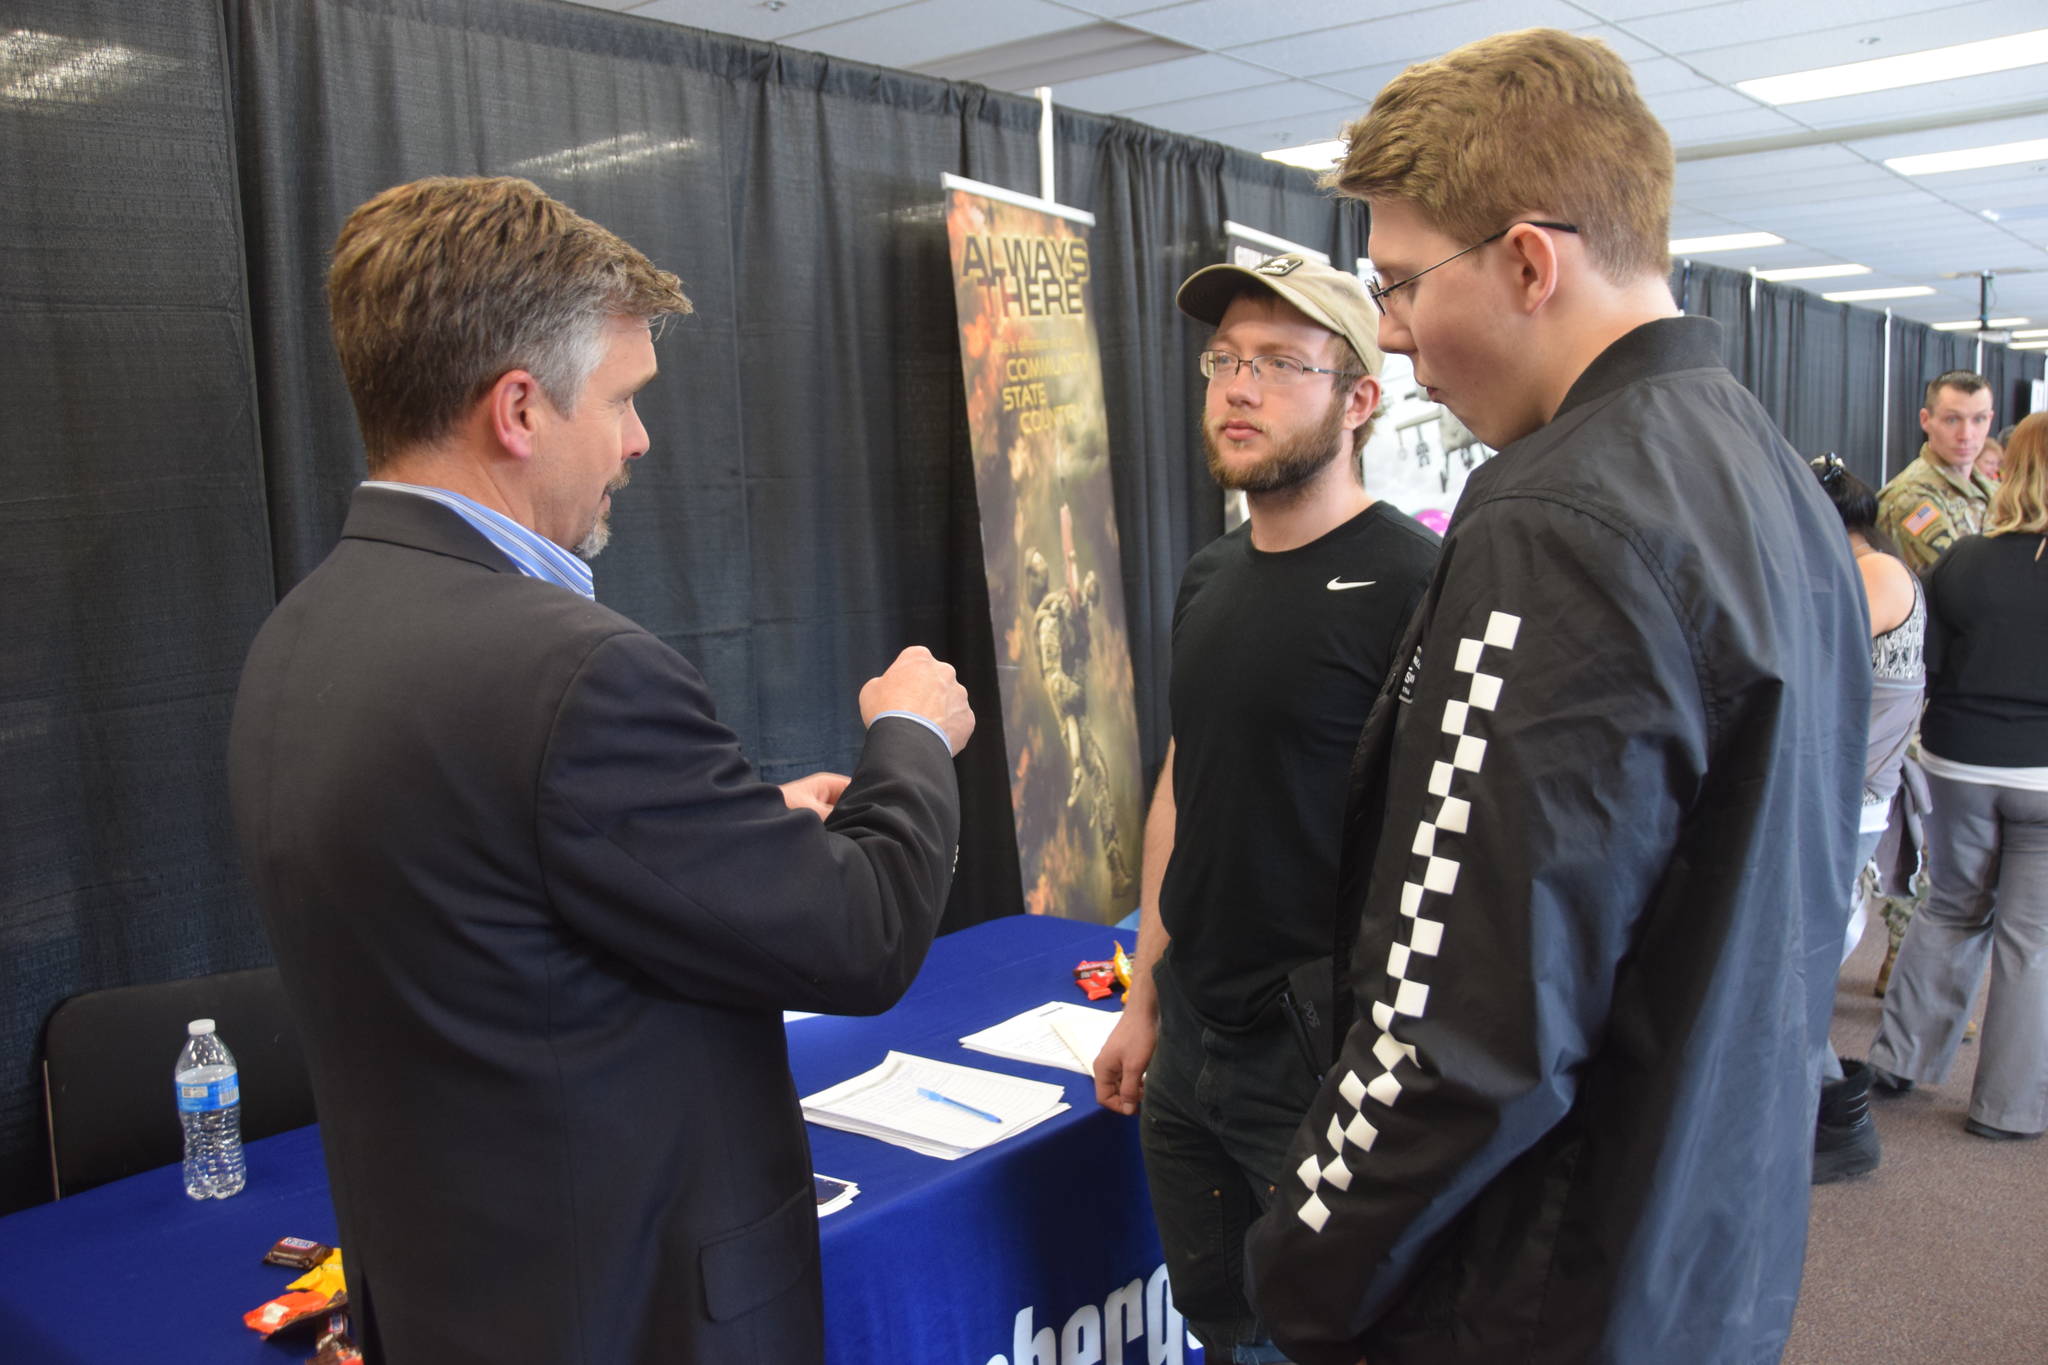 Florian Borowski with Schlumberger Oilfield Services speaks with potential recruits at the Peninsula Job Fair at the Soldotna Regional Sports Complex in Soldotna, Alaska, on March 21, 2019. (Photo by Brian Mazurek/Peninsula Clarion)